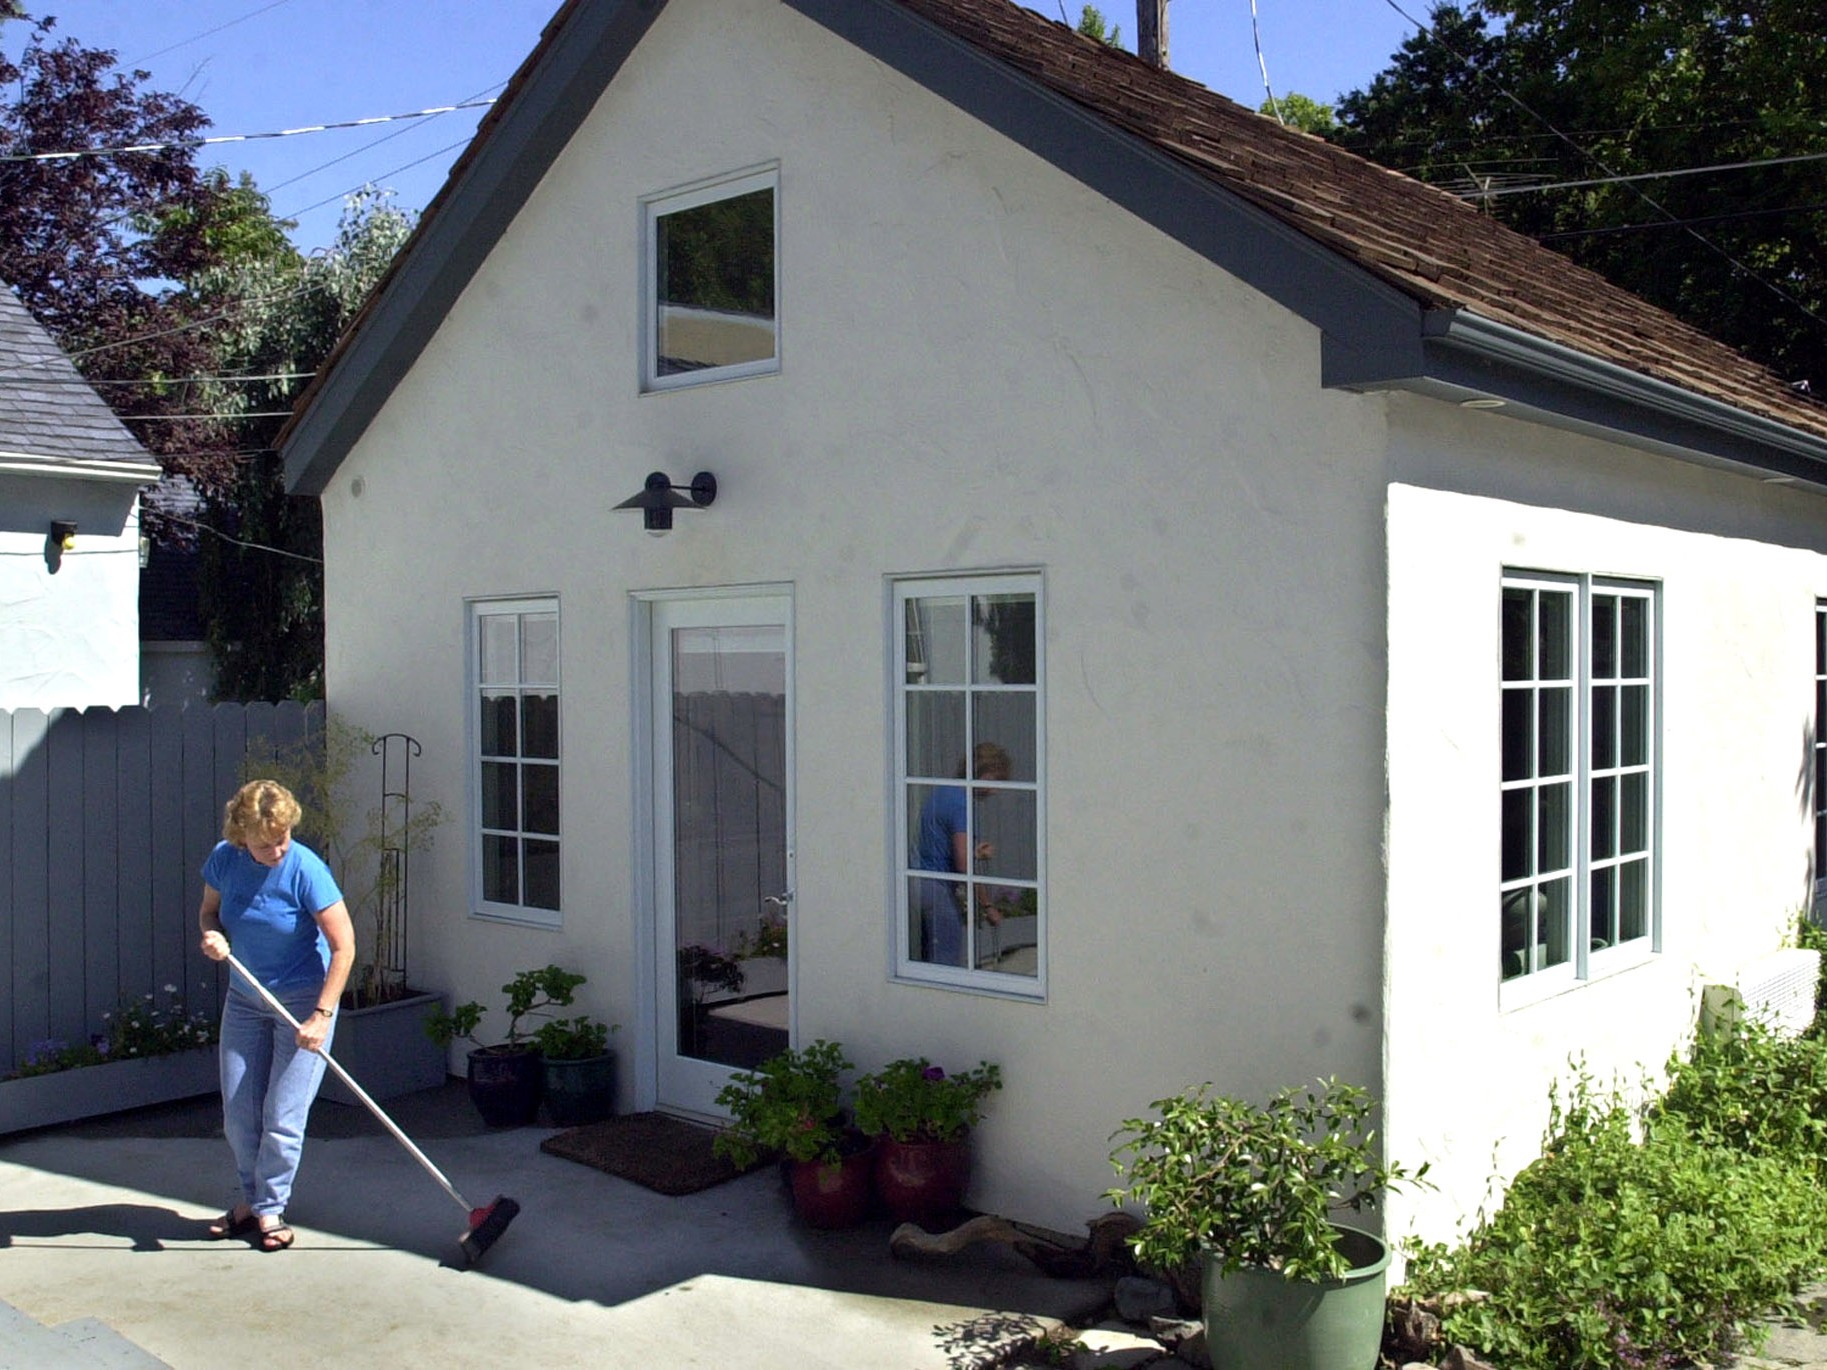 New California Laws Will Make It Easier To Build Granny Flats